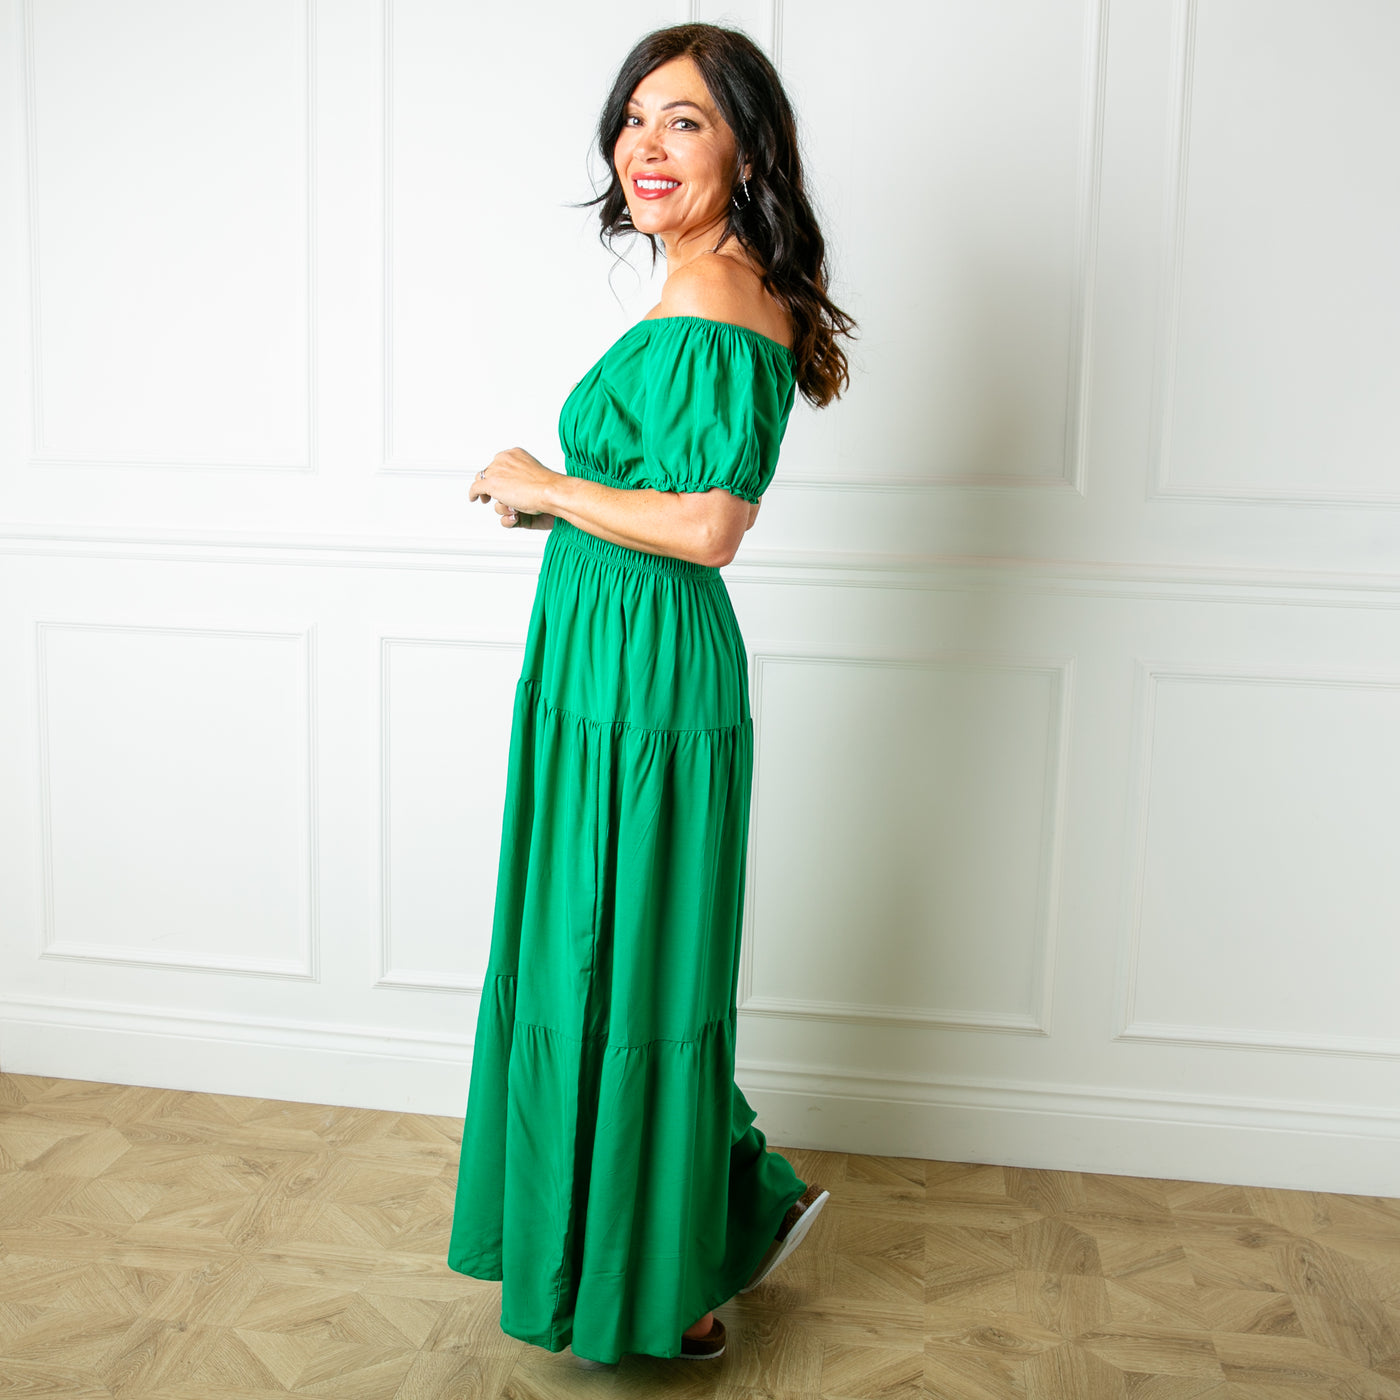 The emerald green Button Front Maxi Dress with a tiered maxi skirt, perfect for your summer holiday